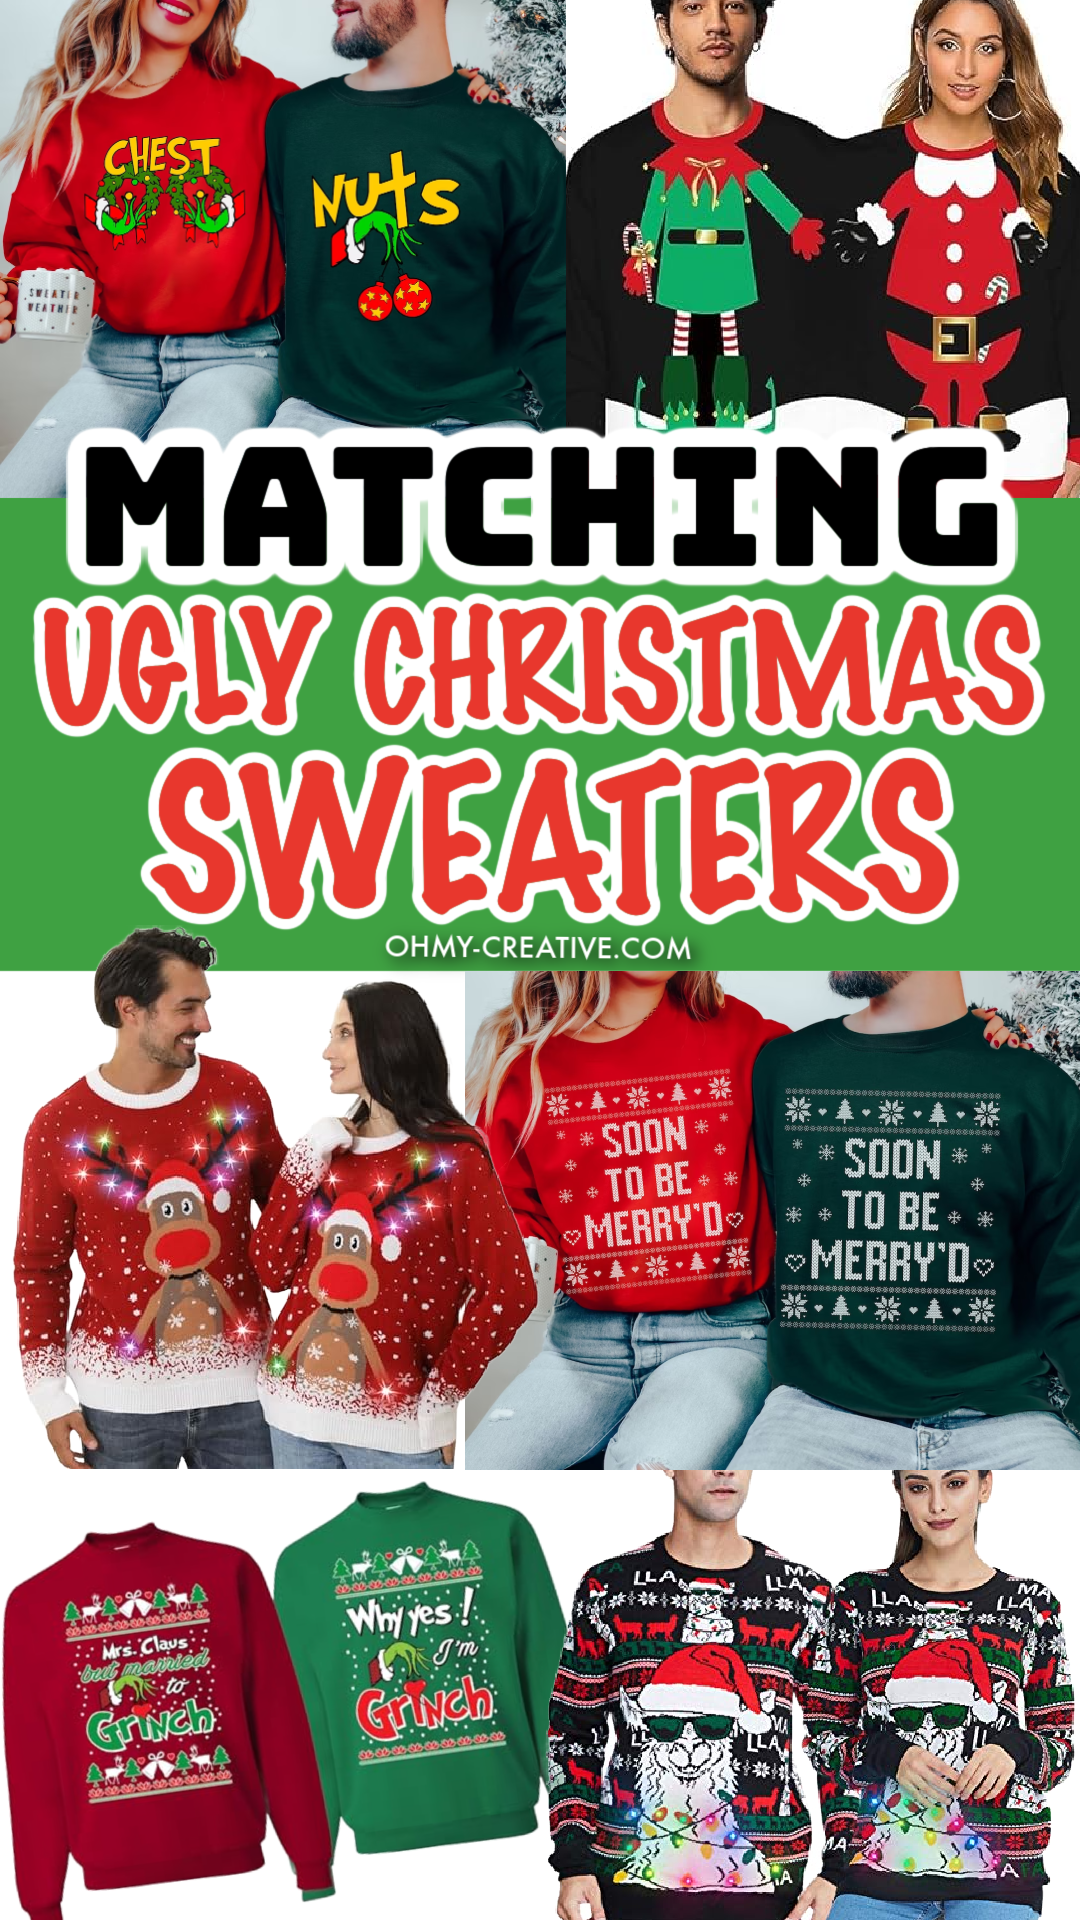 A collage of matching ugly Christmas Sweaters for couples, families or friends. Lots of tacky, funny Christmas sweaters.